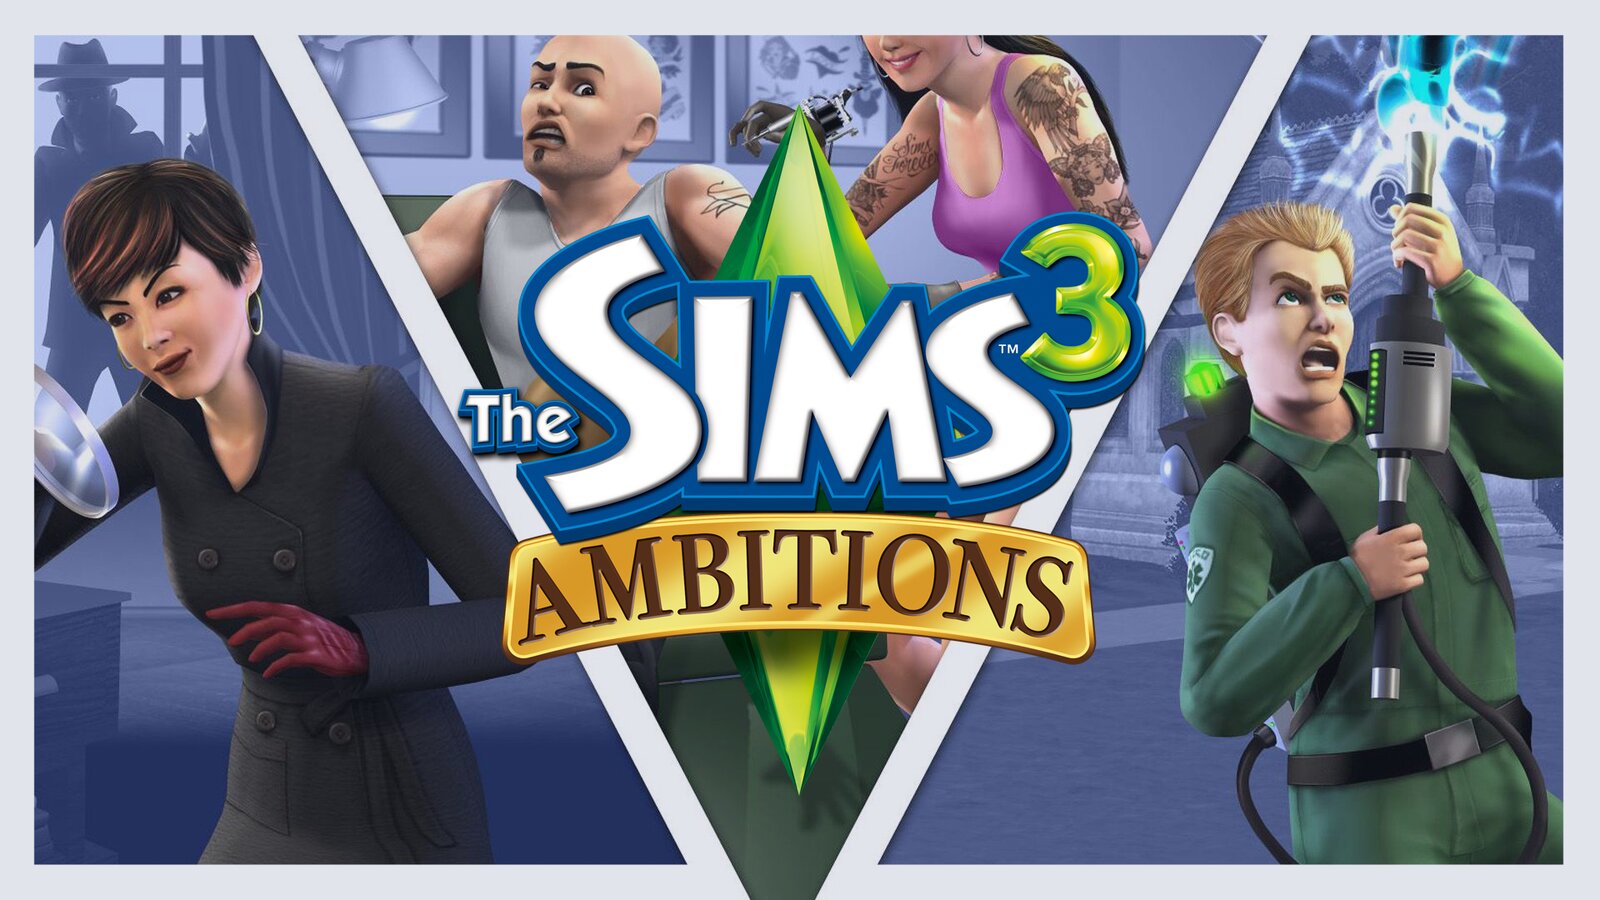 The Sims 3 - Ambitions